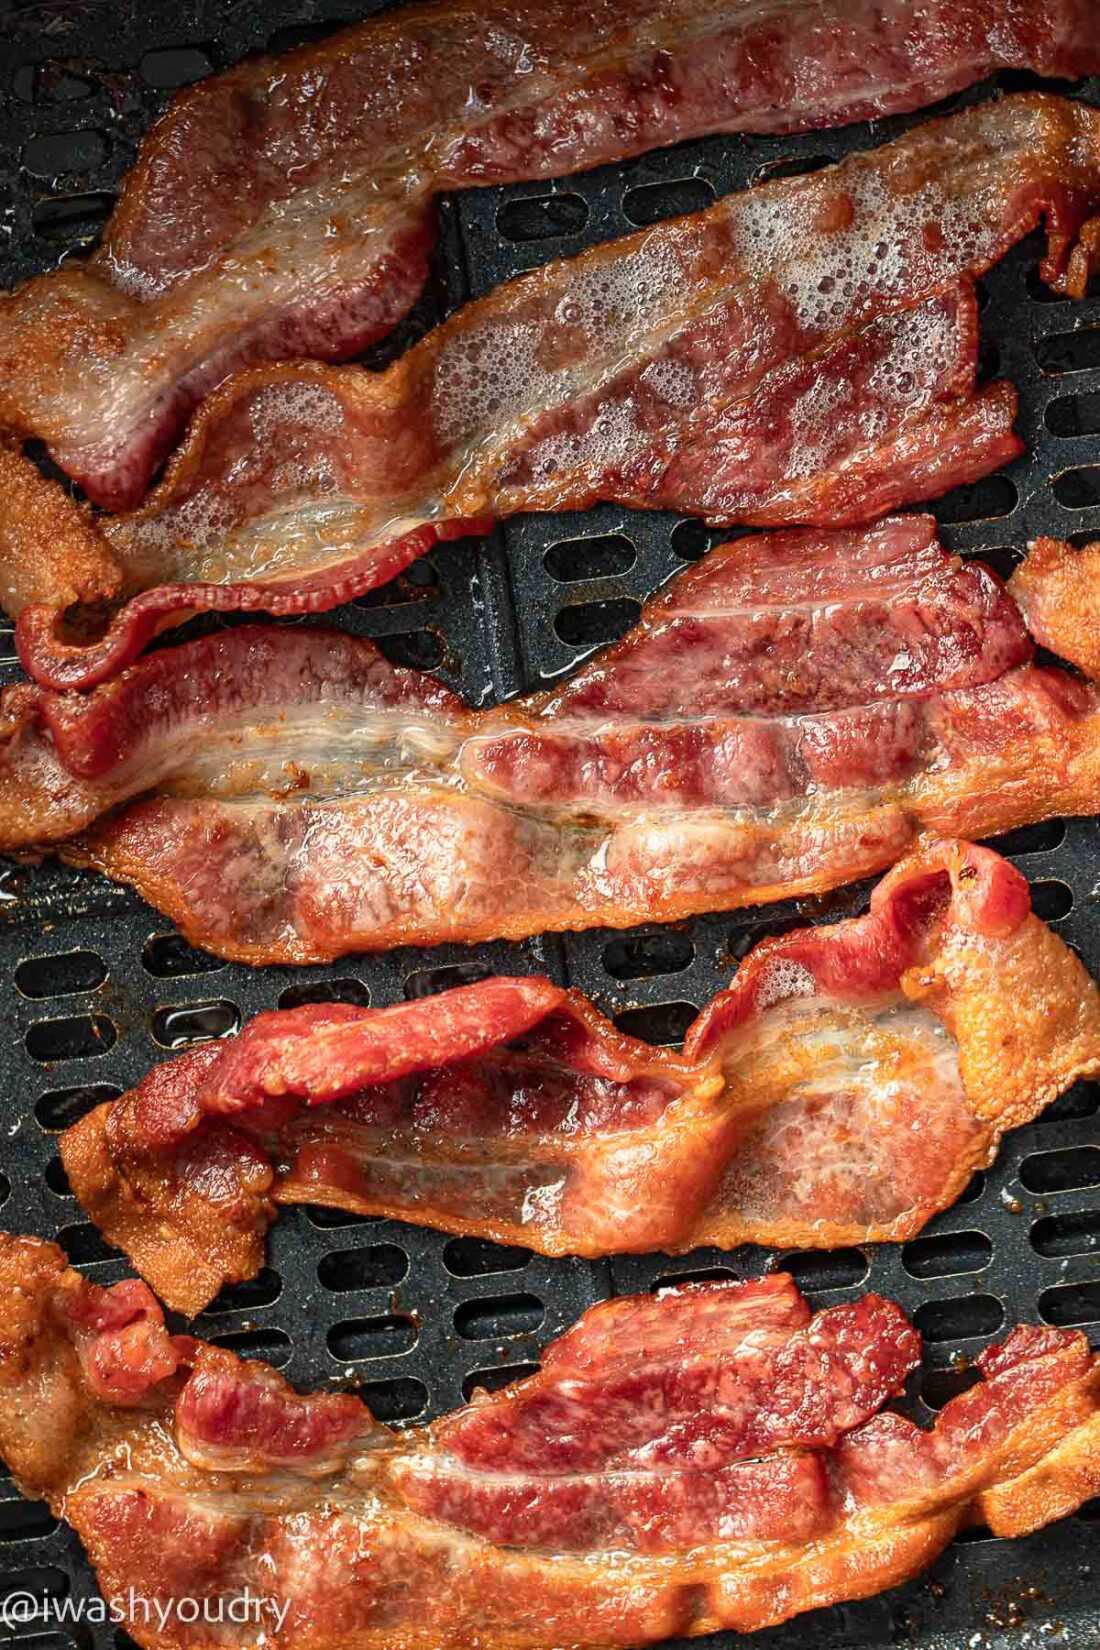 Cooked Bacon in Air Fryer Basket